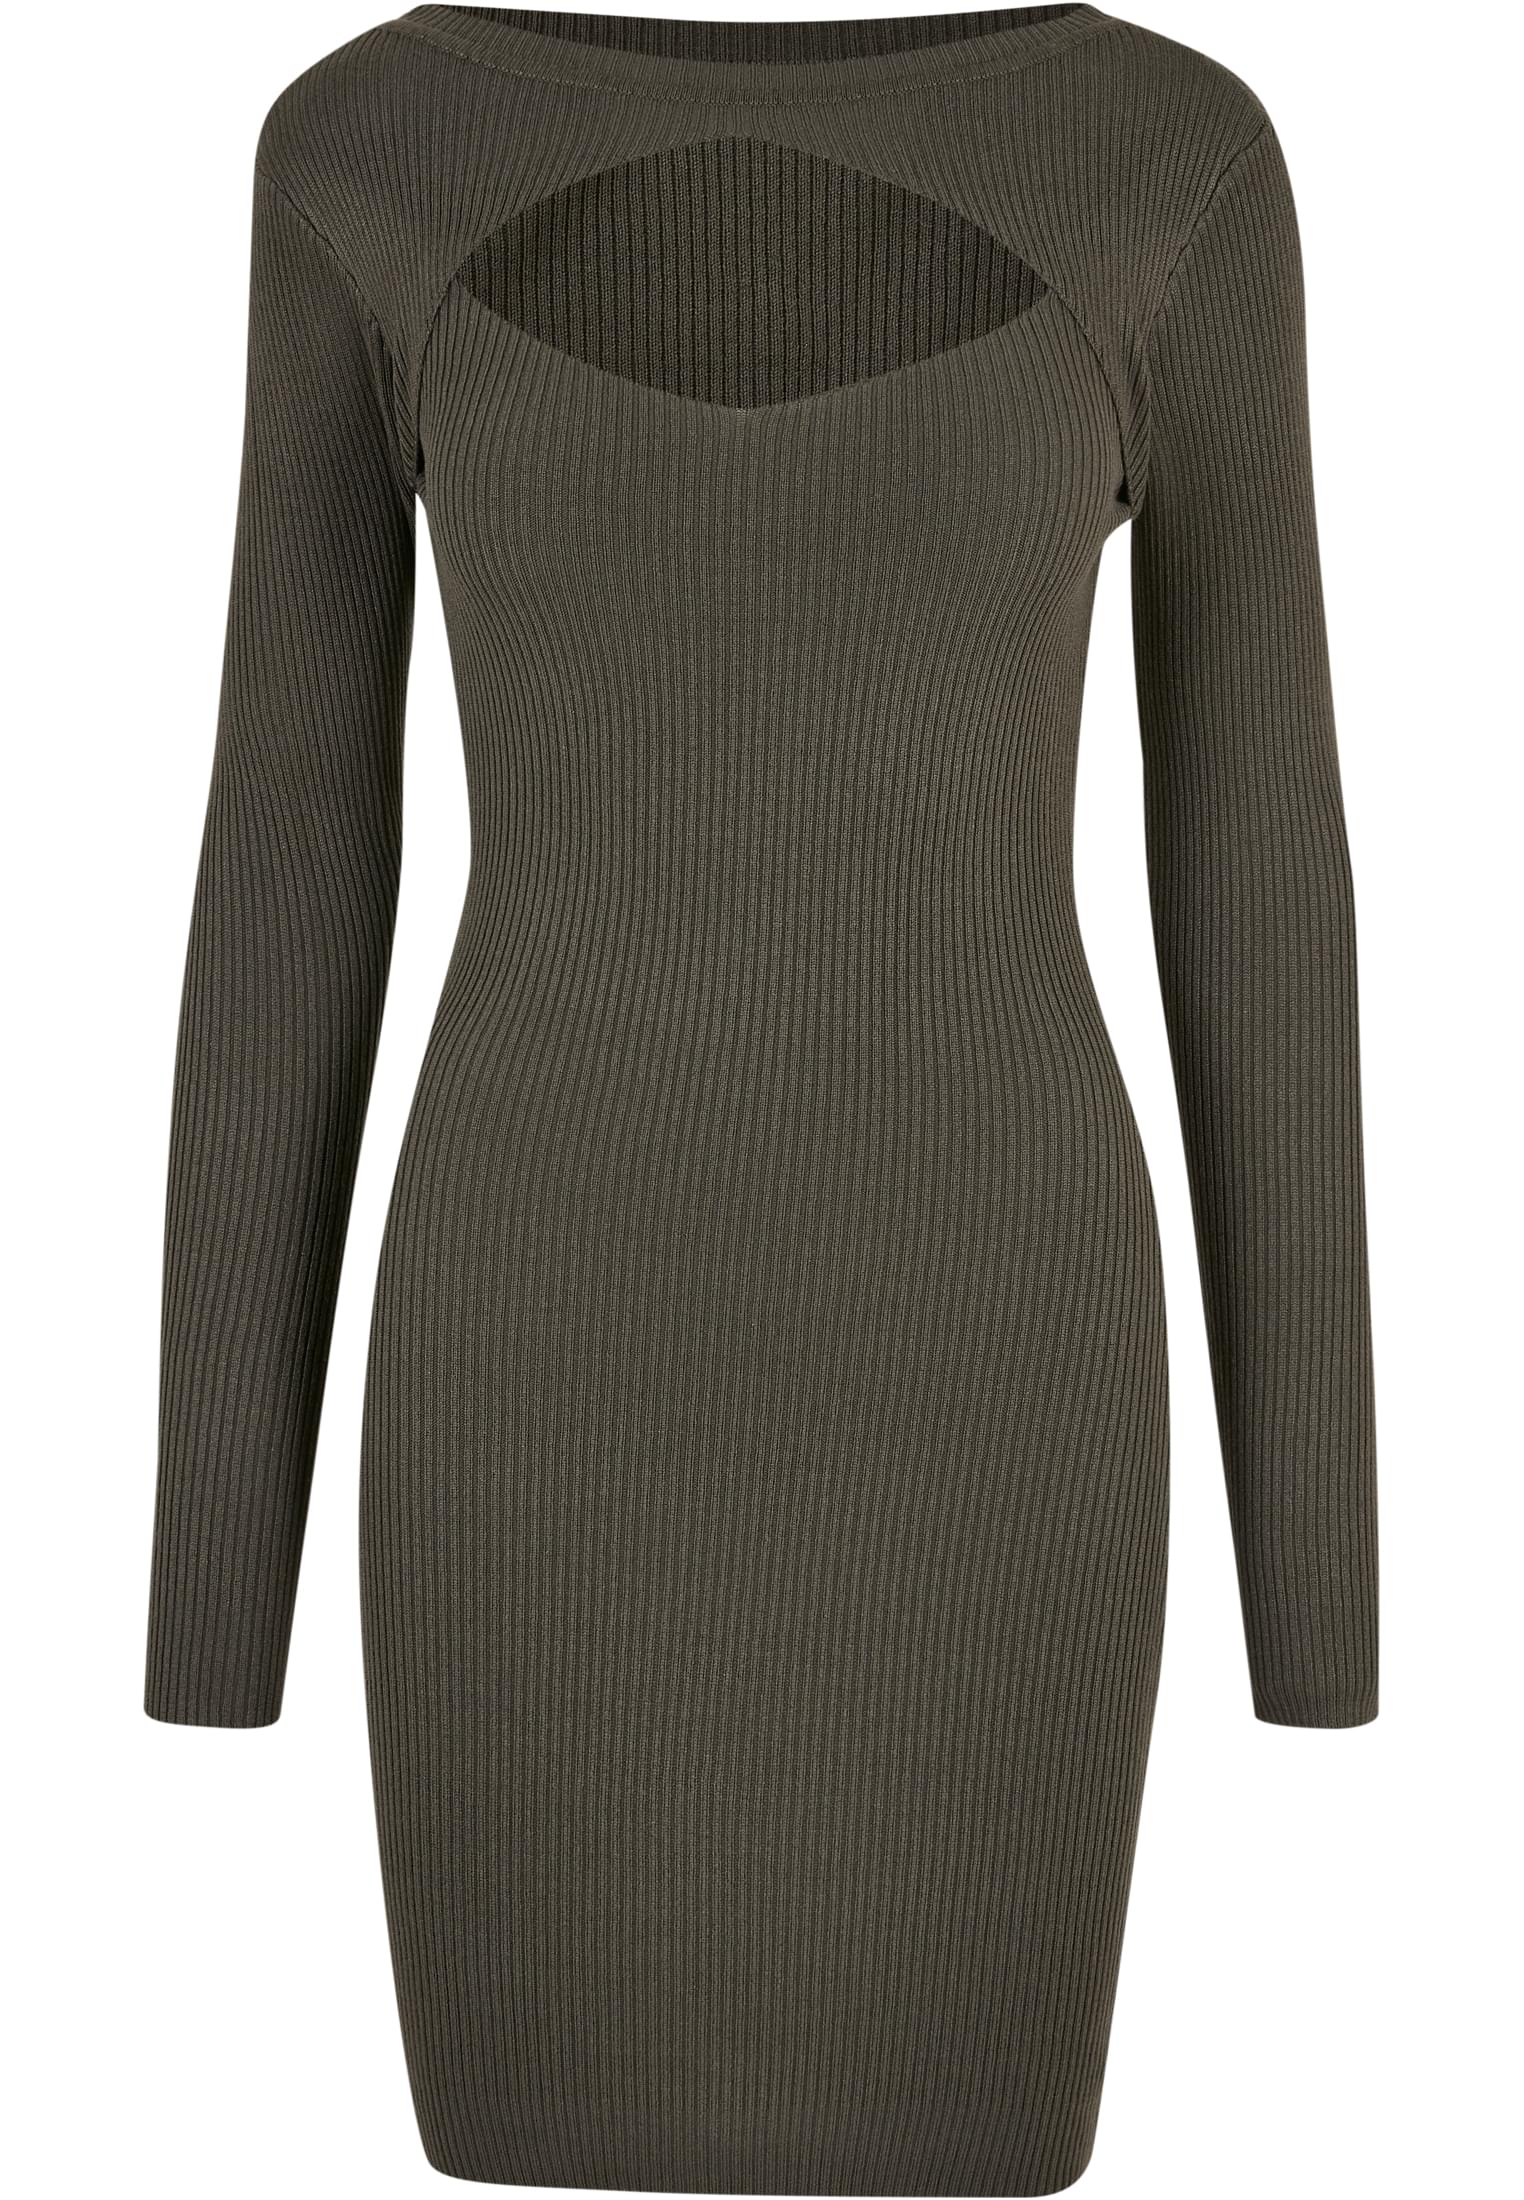 Damen Ladies Cut Out Dress in Farbe olive